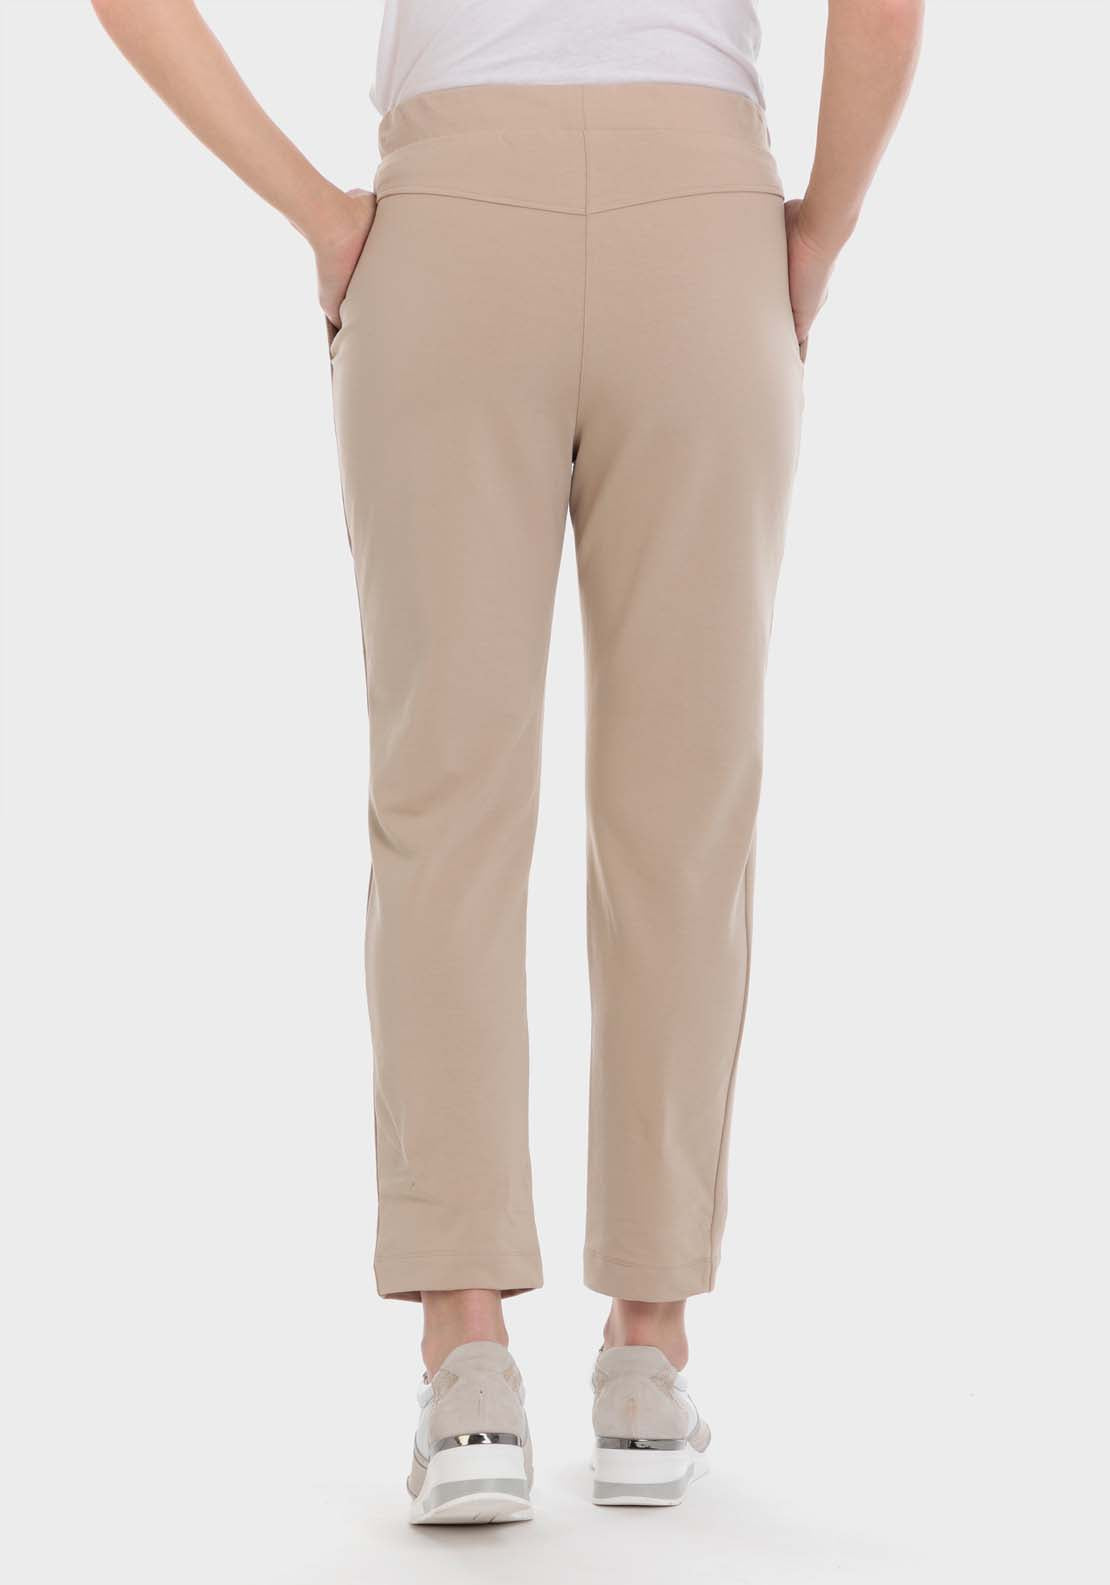 Punt Roma Trousers - Beige 2 Shaws Department Stores